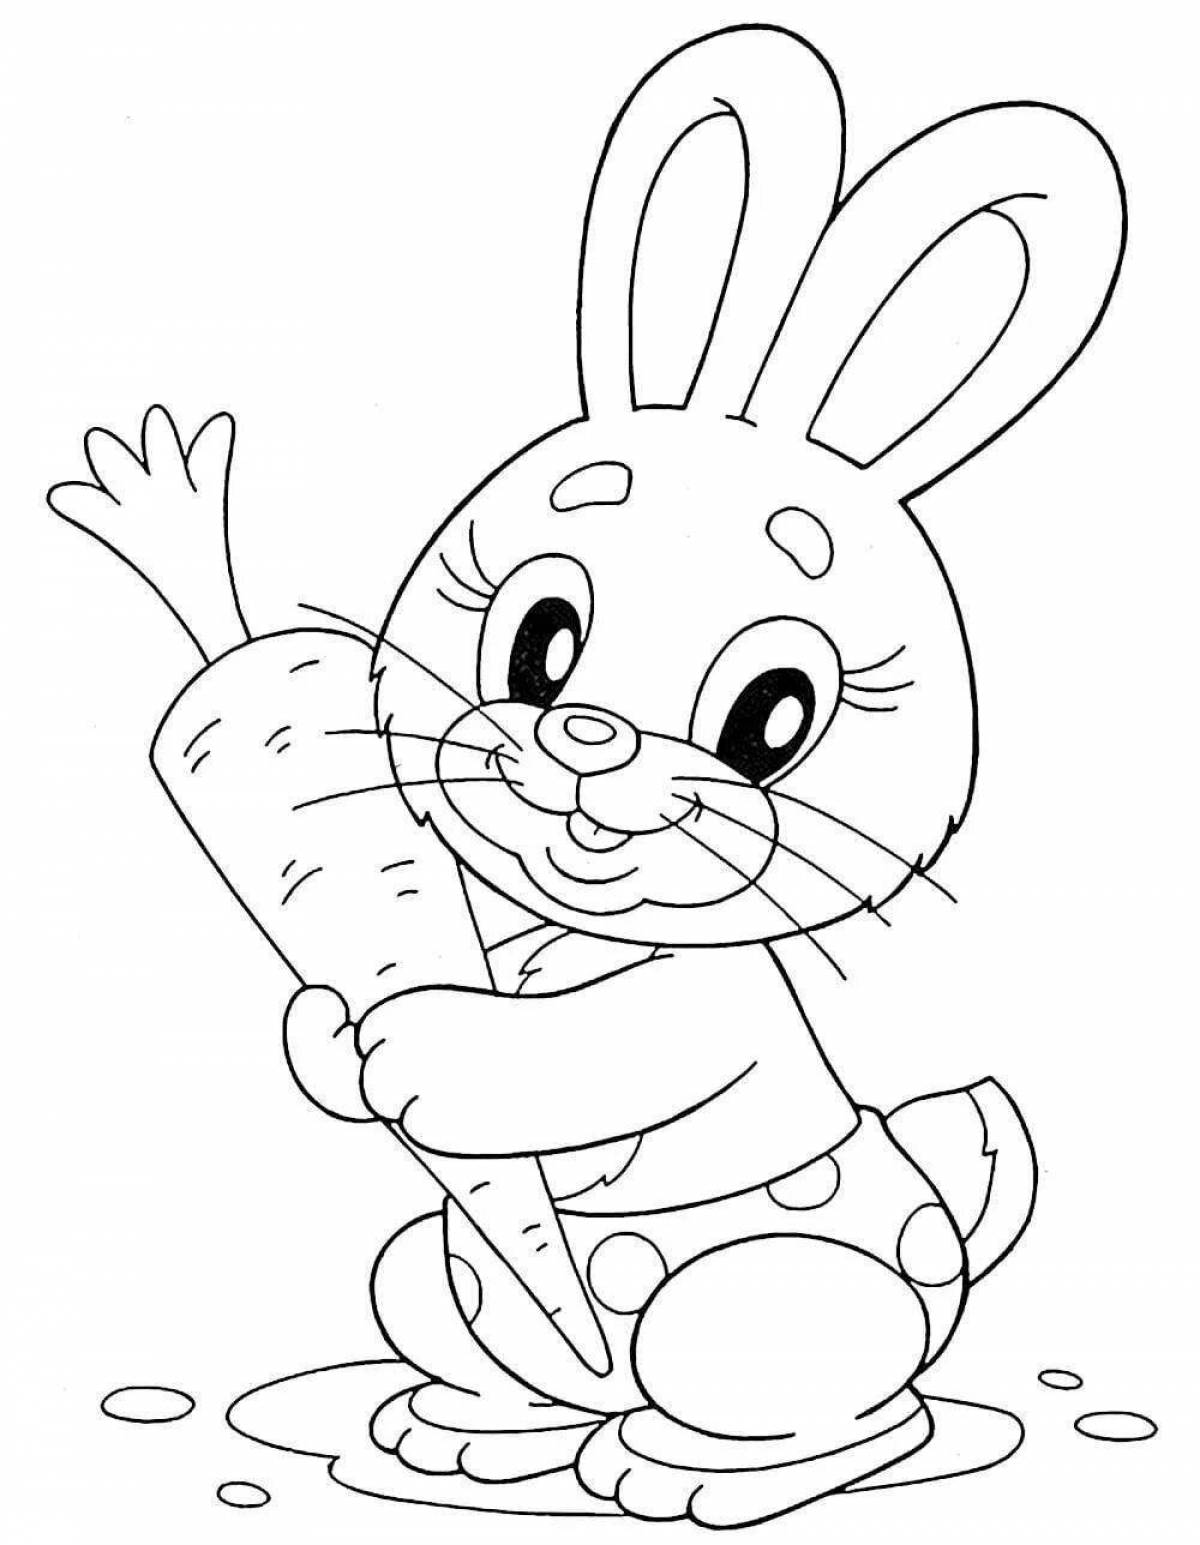 Wonderful hare-coloring book for children 2-3 years old